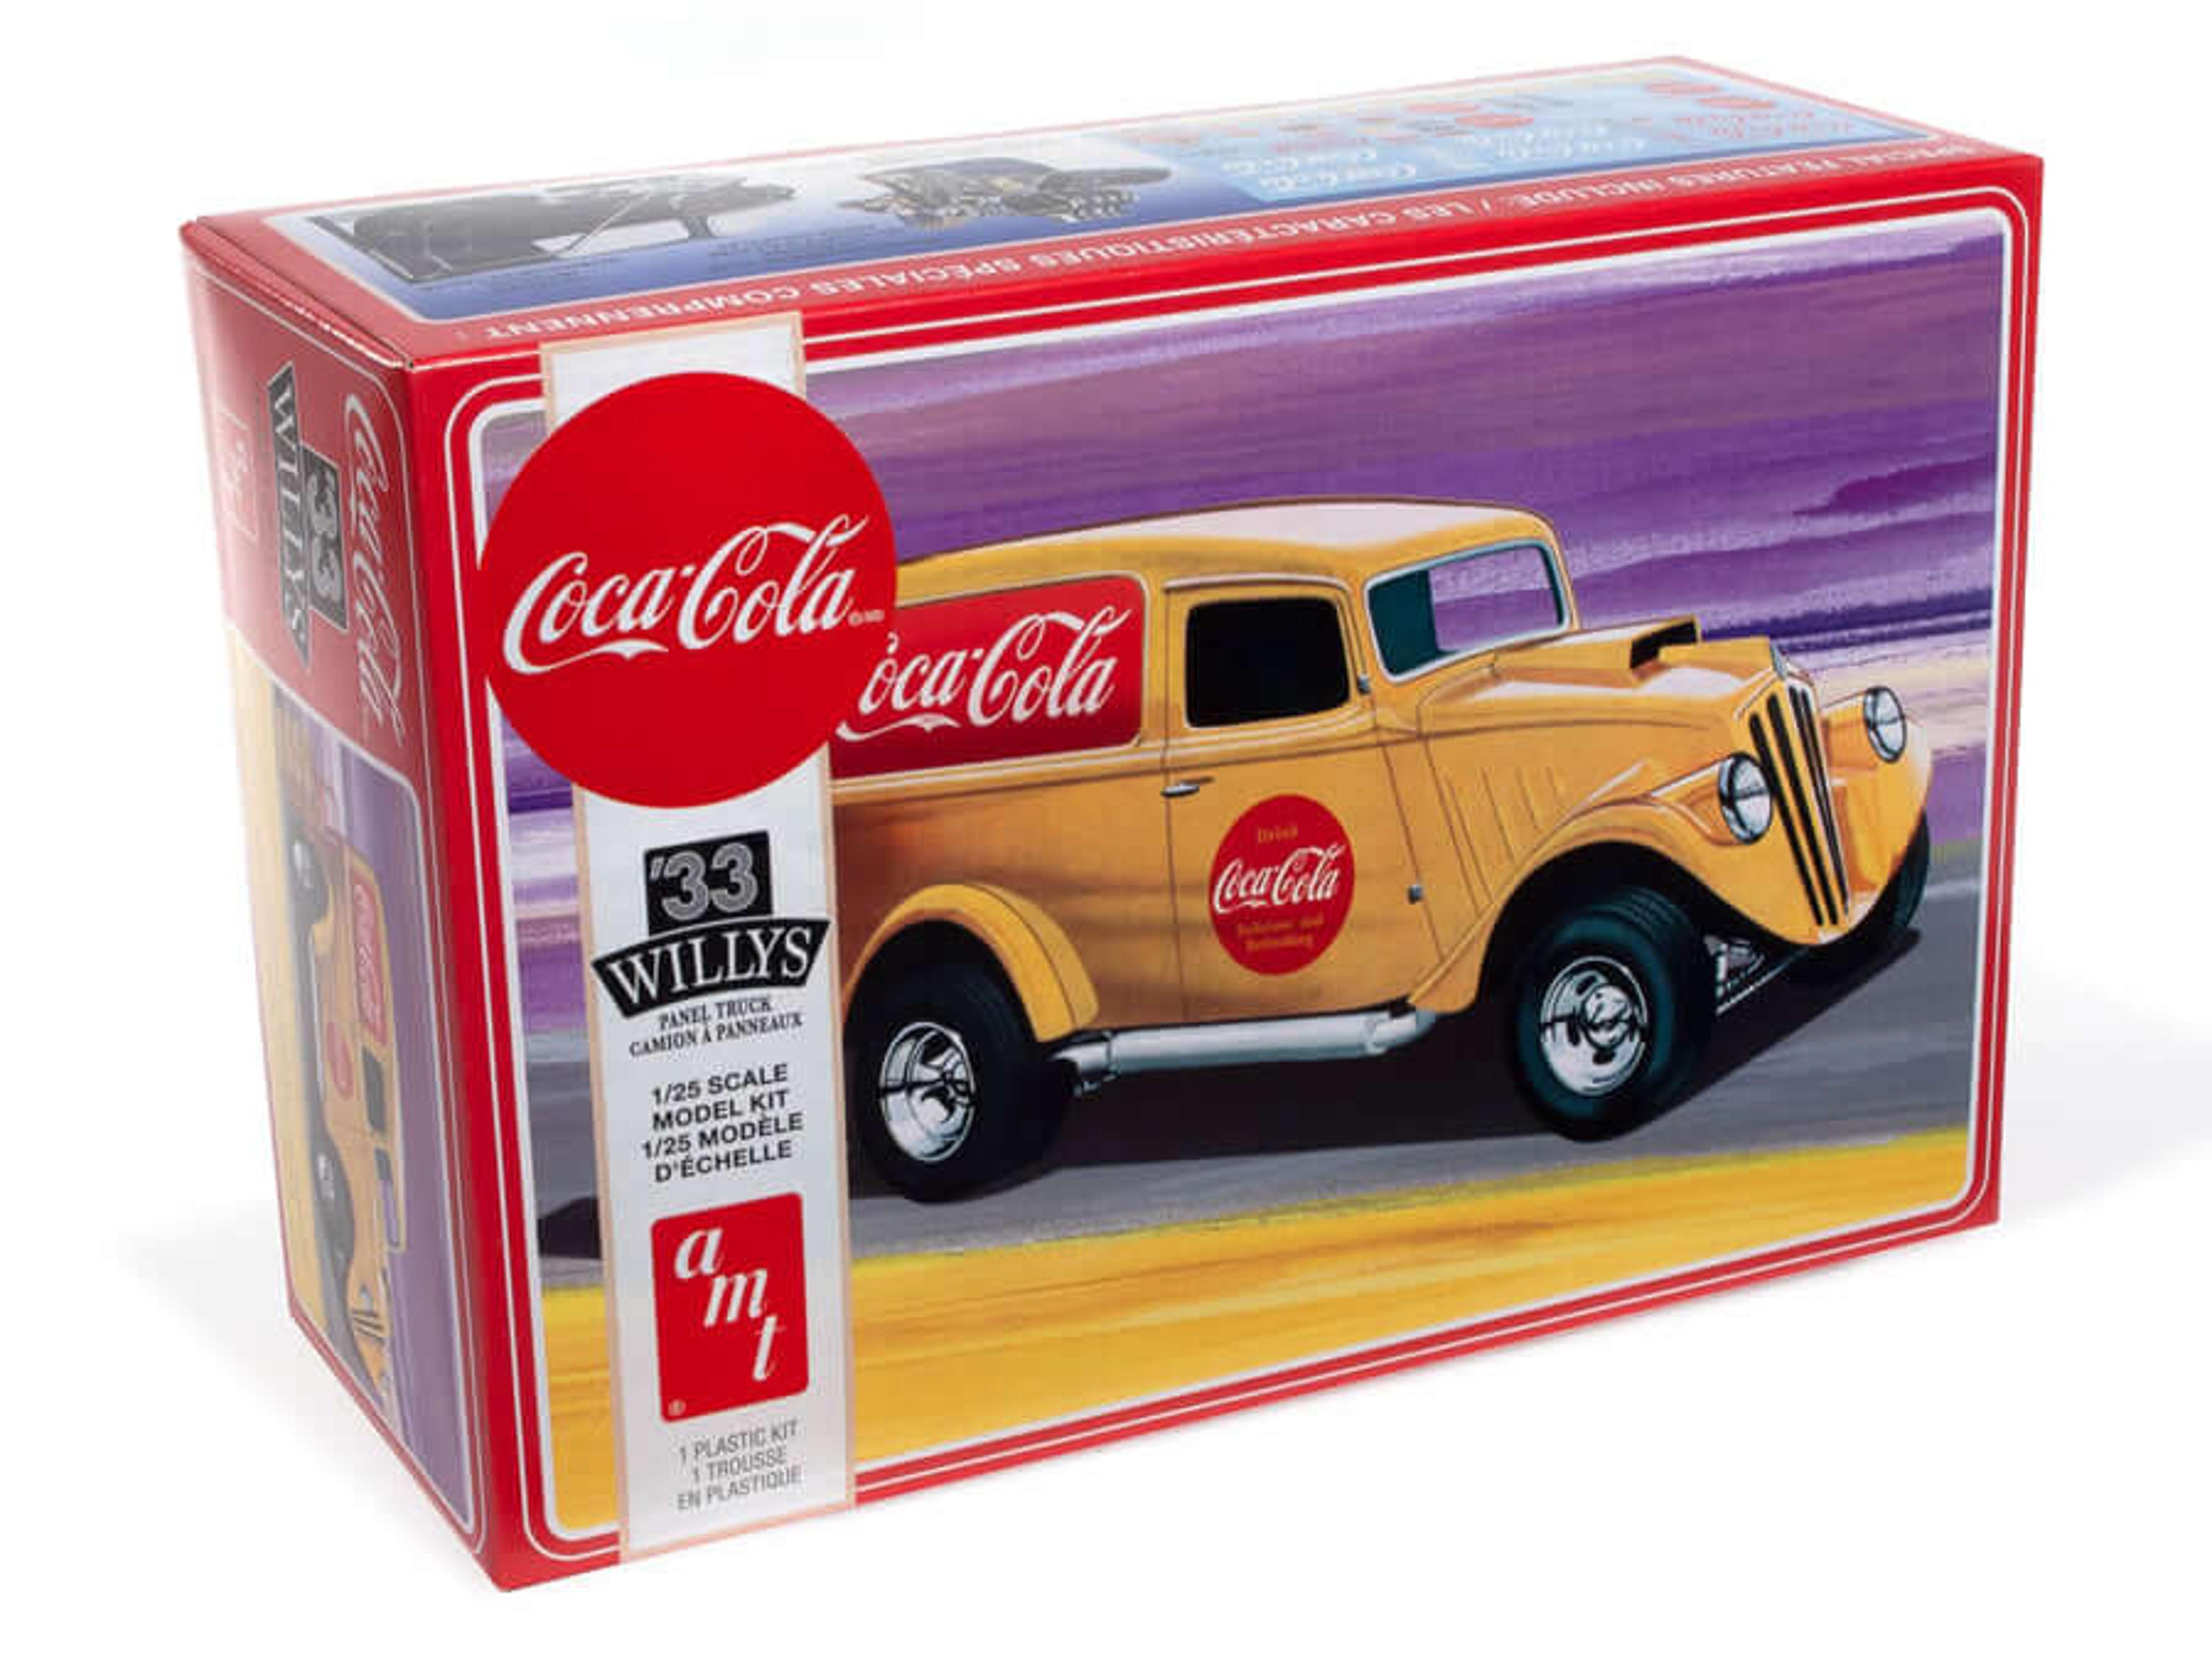 AMT 1/25 1933 Willys Coca-Cola Panel Truck Model Kit